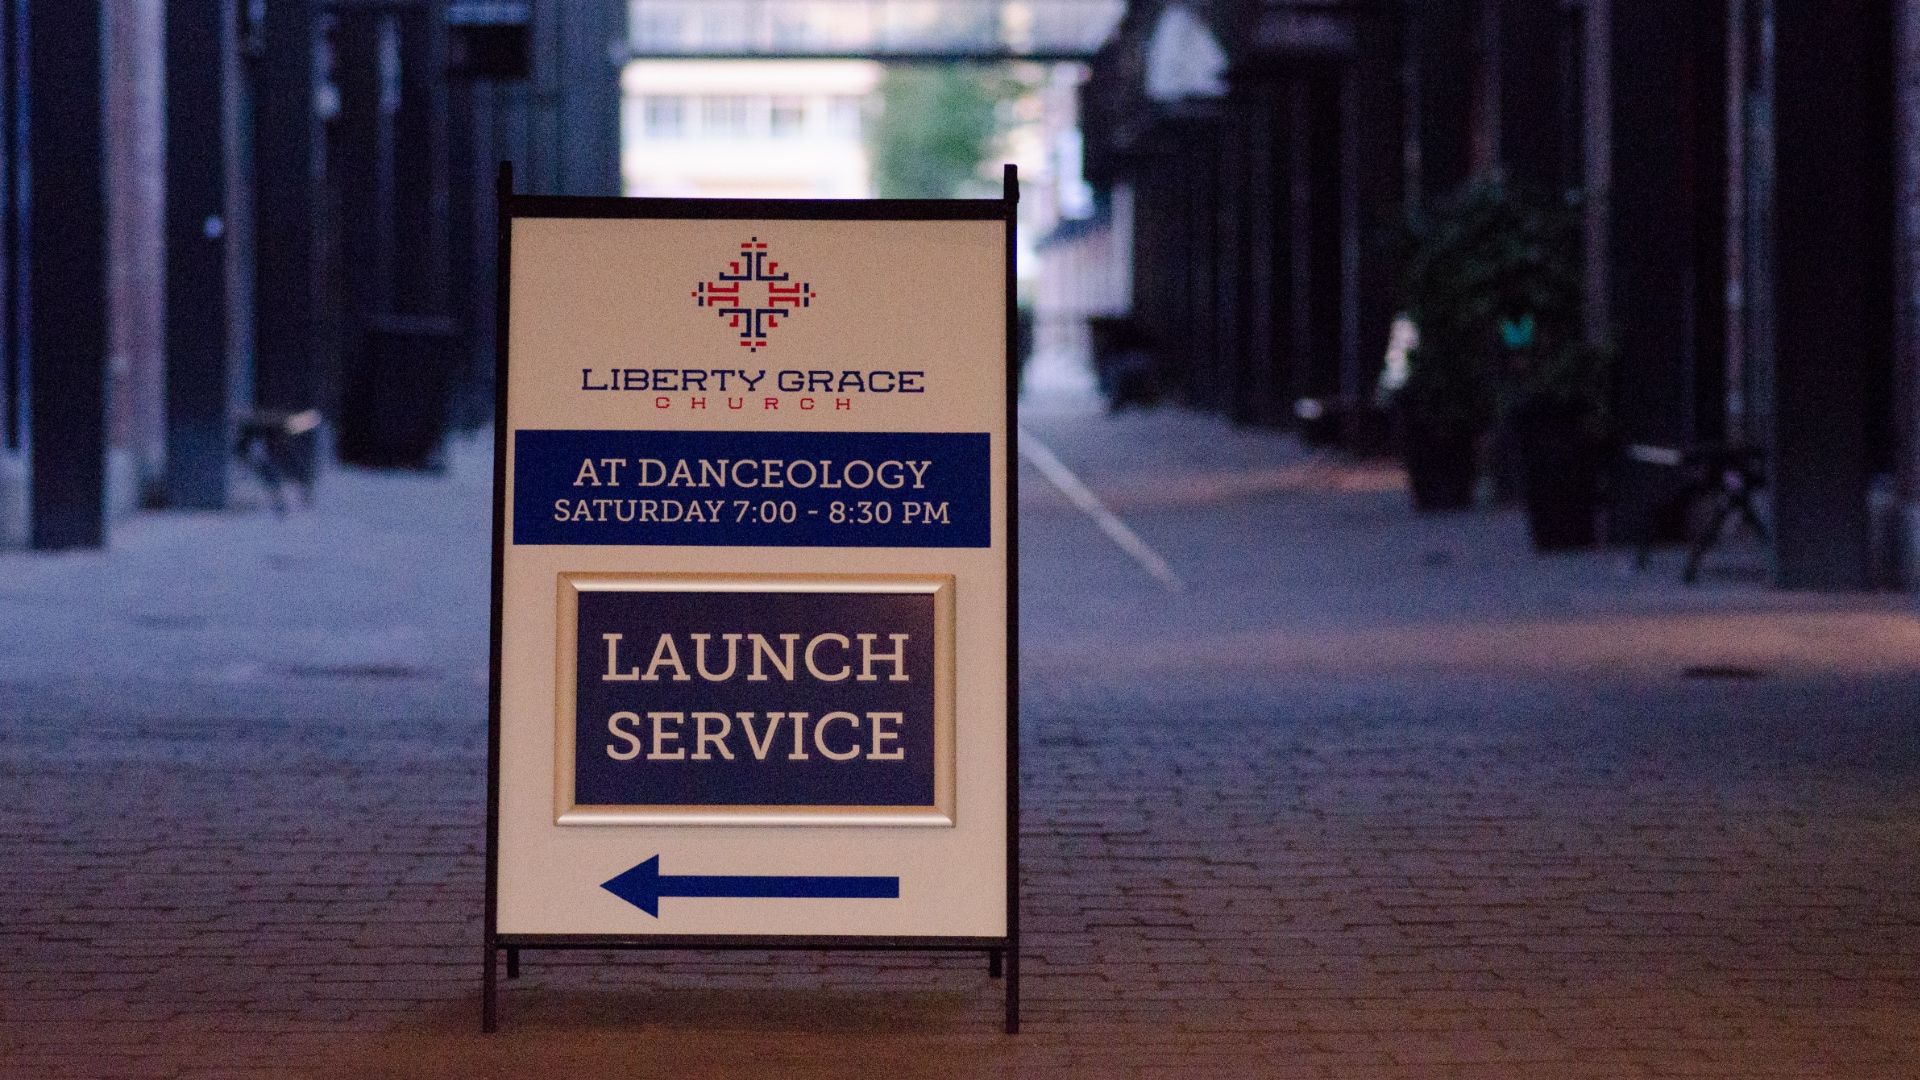 launch service for Liberty Grace Church